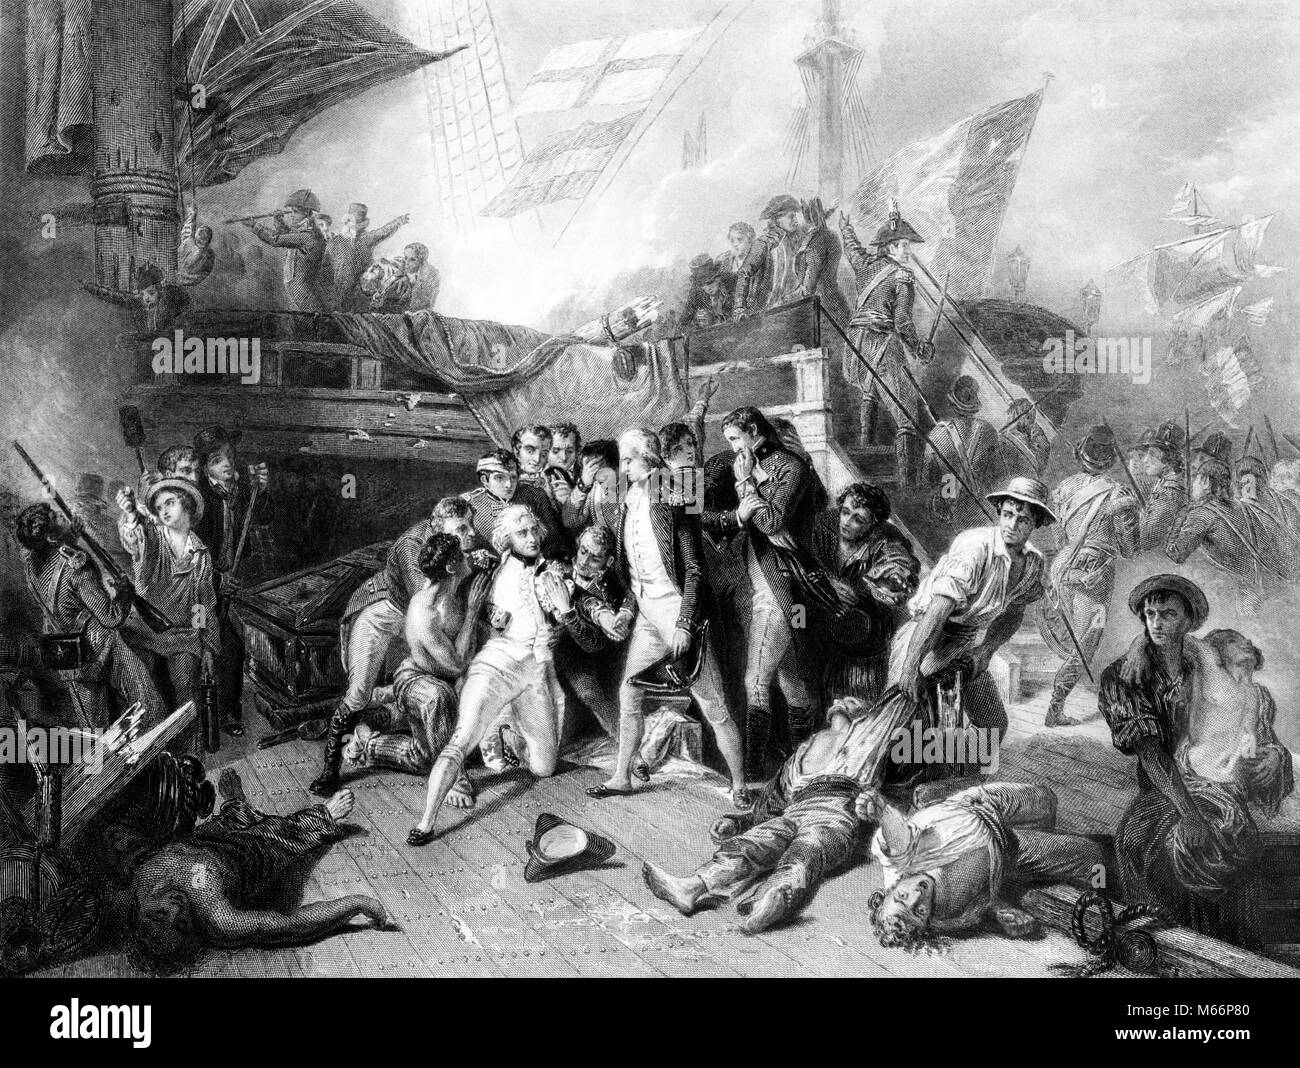 1800s ENGRAVING DEATH OF VICE-ADMIRAL HORATIO LORD NELSON 1805 BATTLE OF TRAFALGAR VISCOUNT BRITISH NAVAL NAPOLEONIC WAR HERO - q59064 CPC001 HARS FAMOUS LEADERSHIP SUPPORT ONE PERSON WITH OTHERS COOPERATION HERO CONFLICTING MALES 1805 ADMIRAL B&W BATTLING BLACK AND WHITE CAUCASIAN ETHNICITY FAMOUS PERSON HAR001 HEROISM HORATIO LORD NELSON OLD FASHIONED PERSONALITIES PERSONS TRAFALGAR VICE-ADMIRAL VISCOUNT Stock Photo